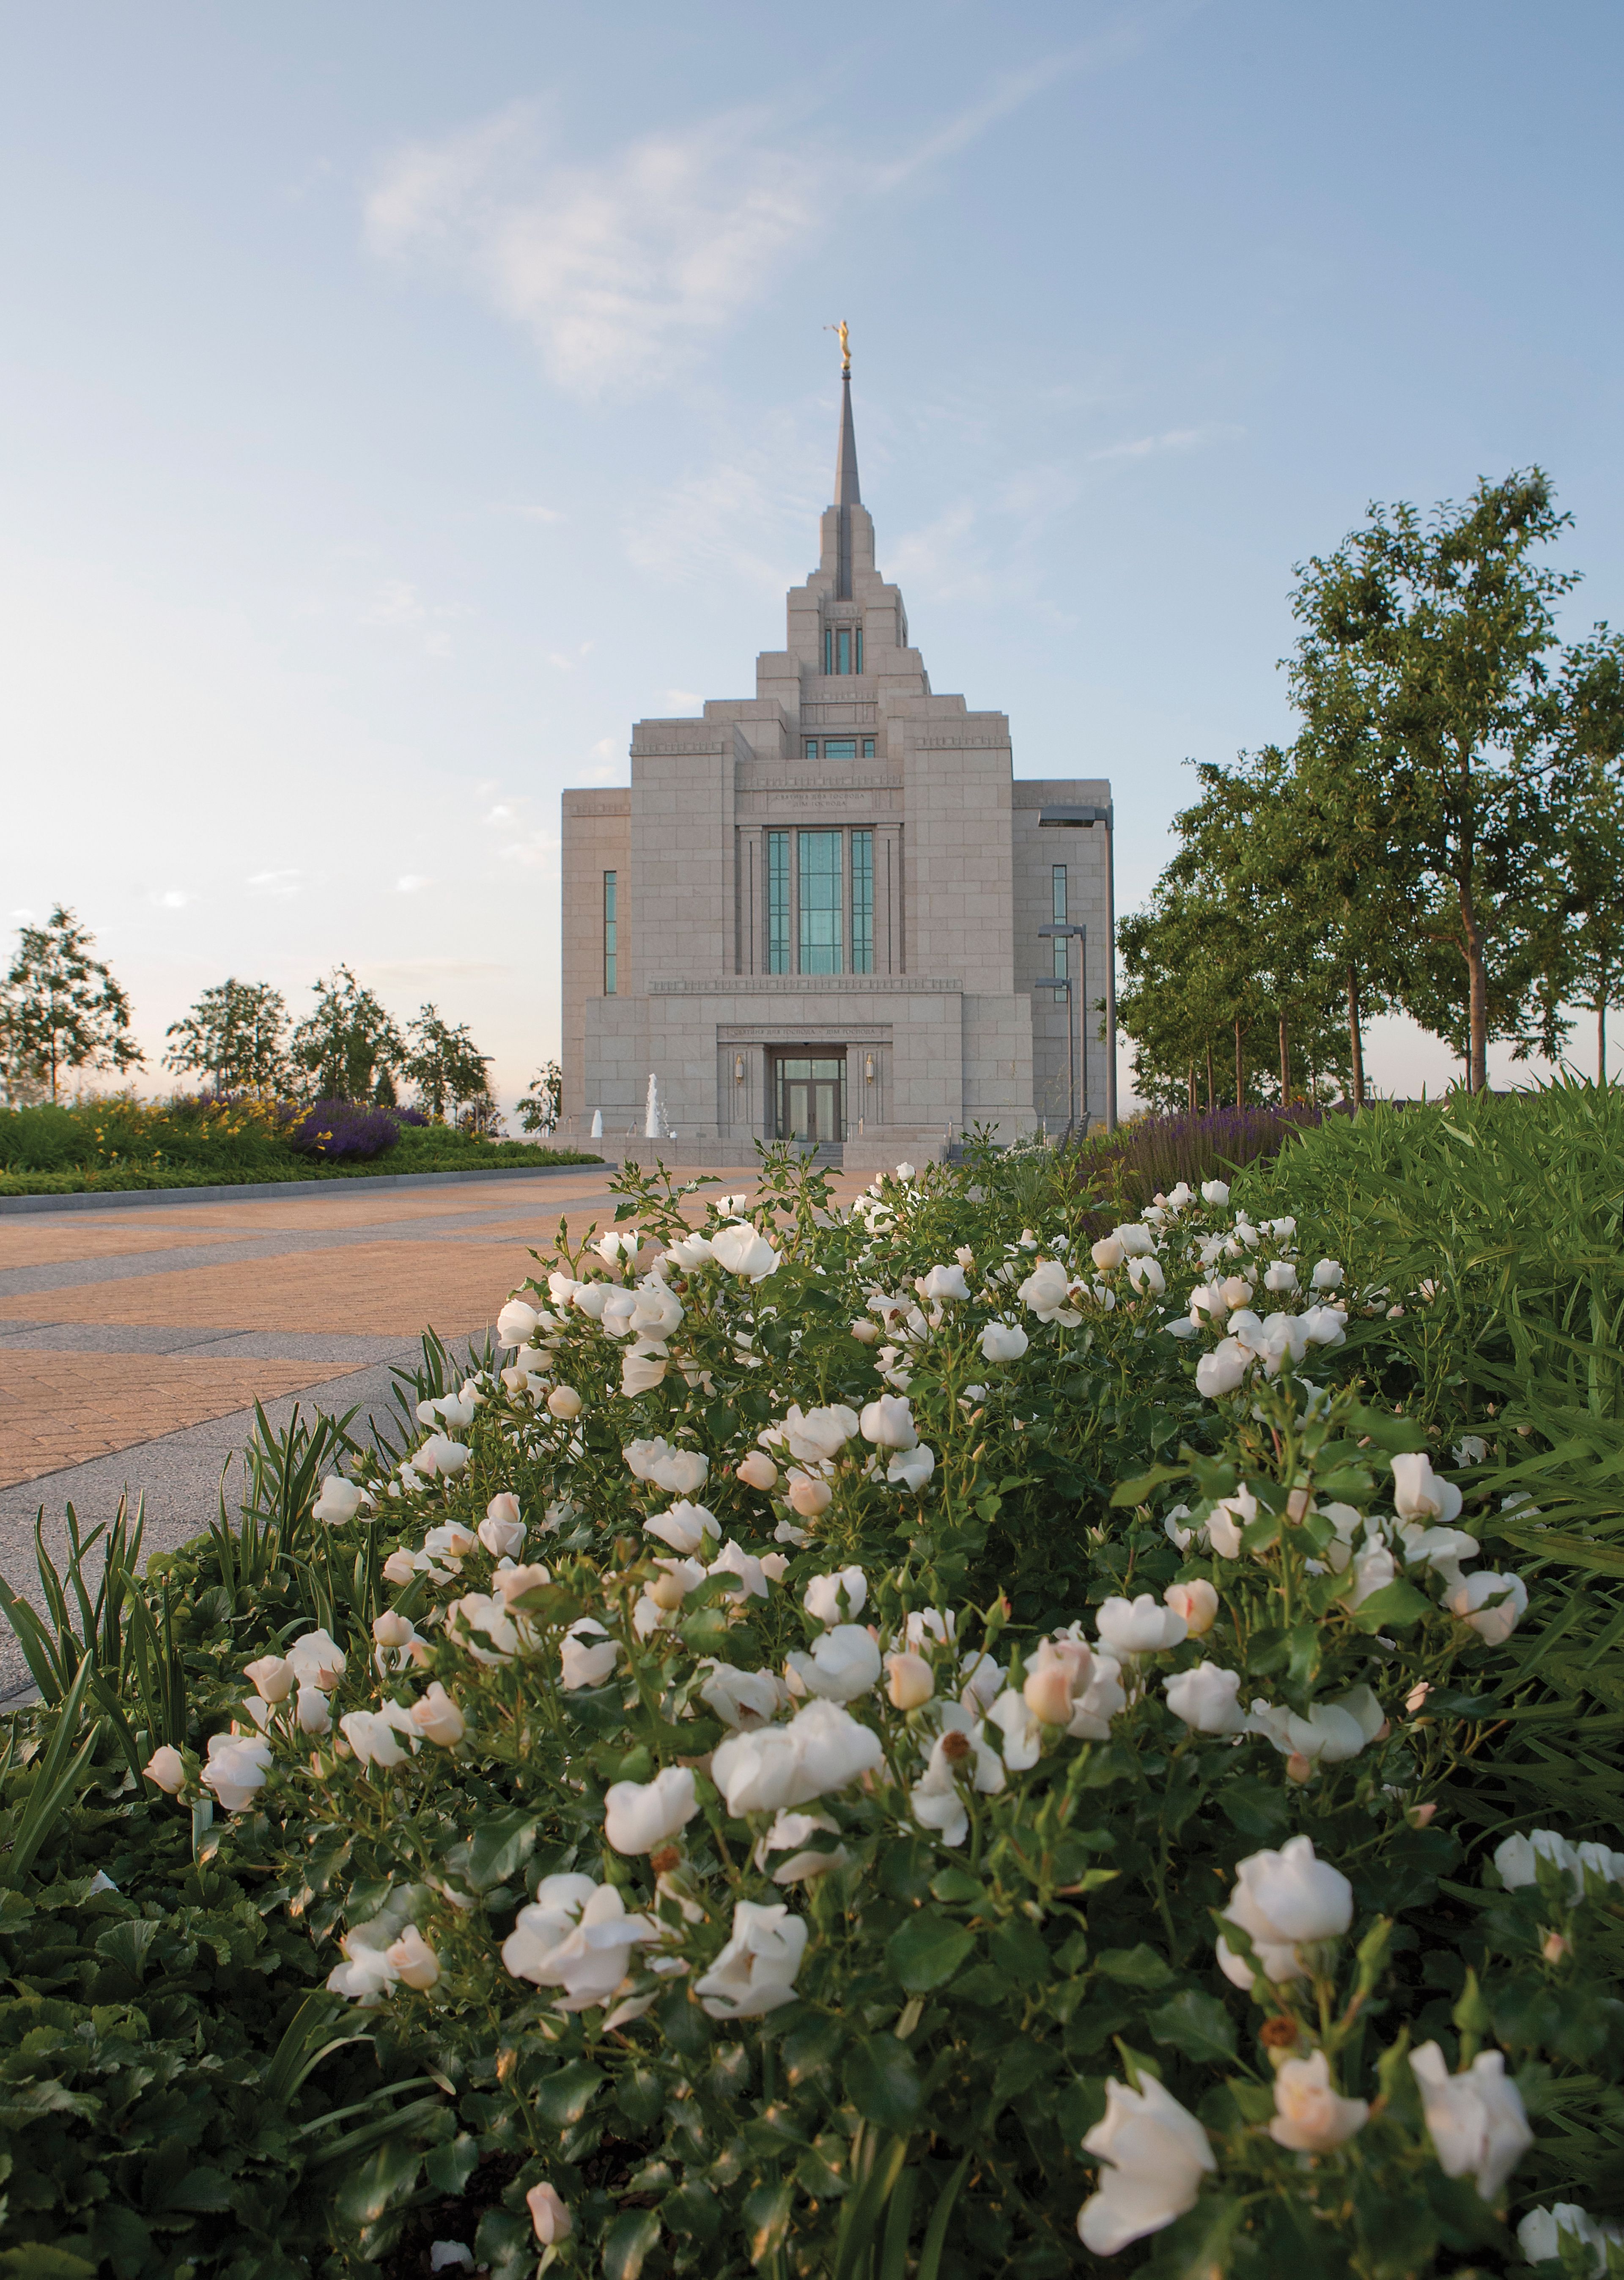 The Kyiv Ukraine Temple, including the entrance and scenery.